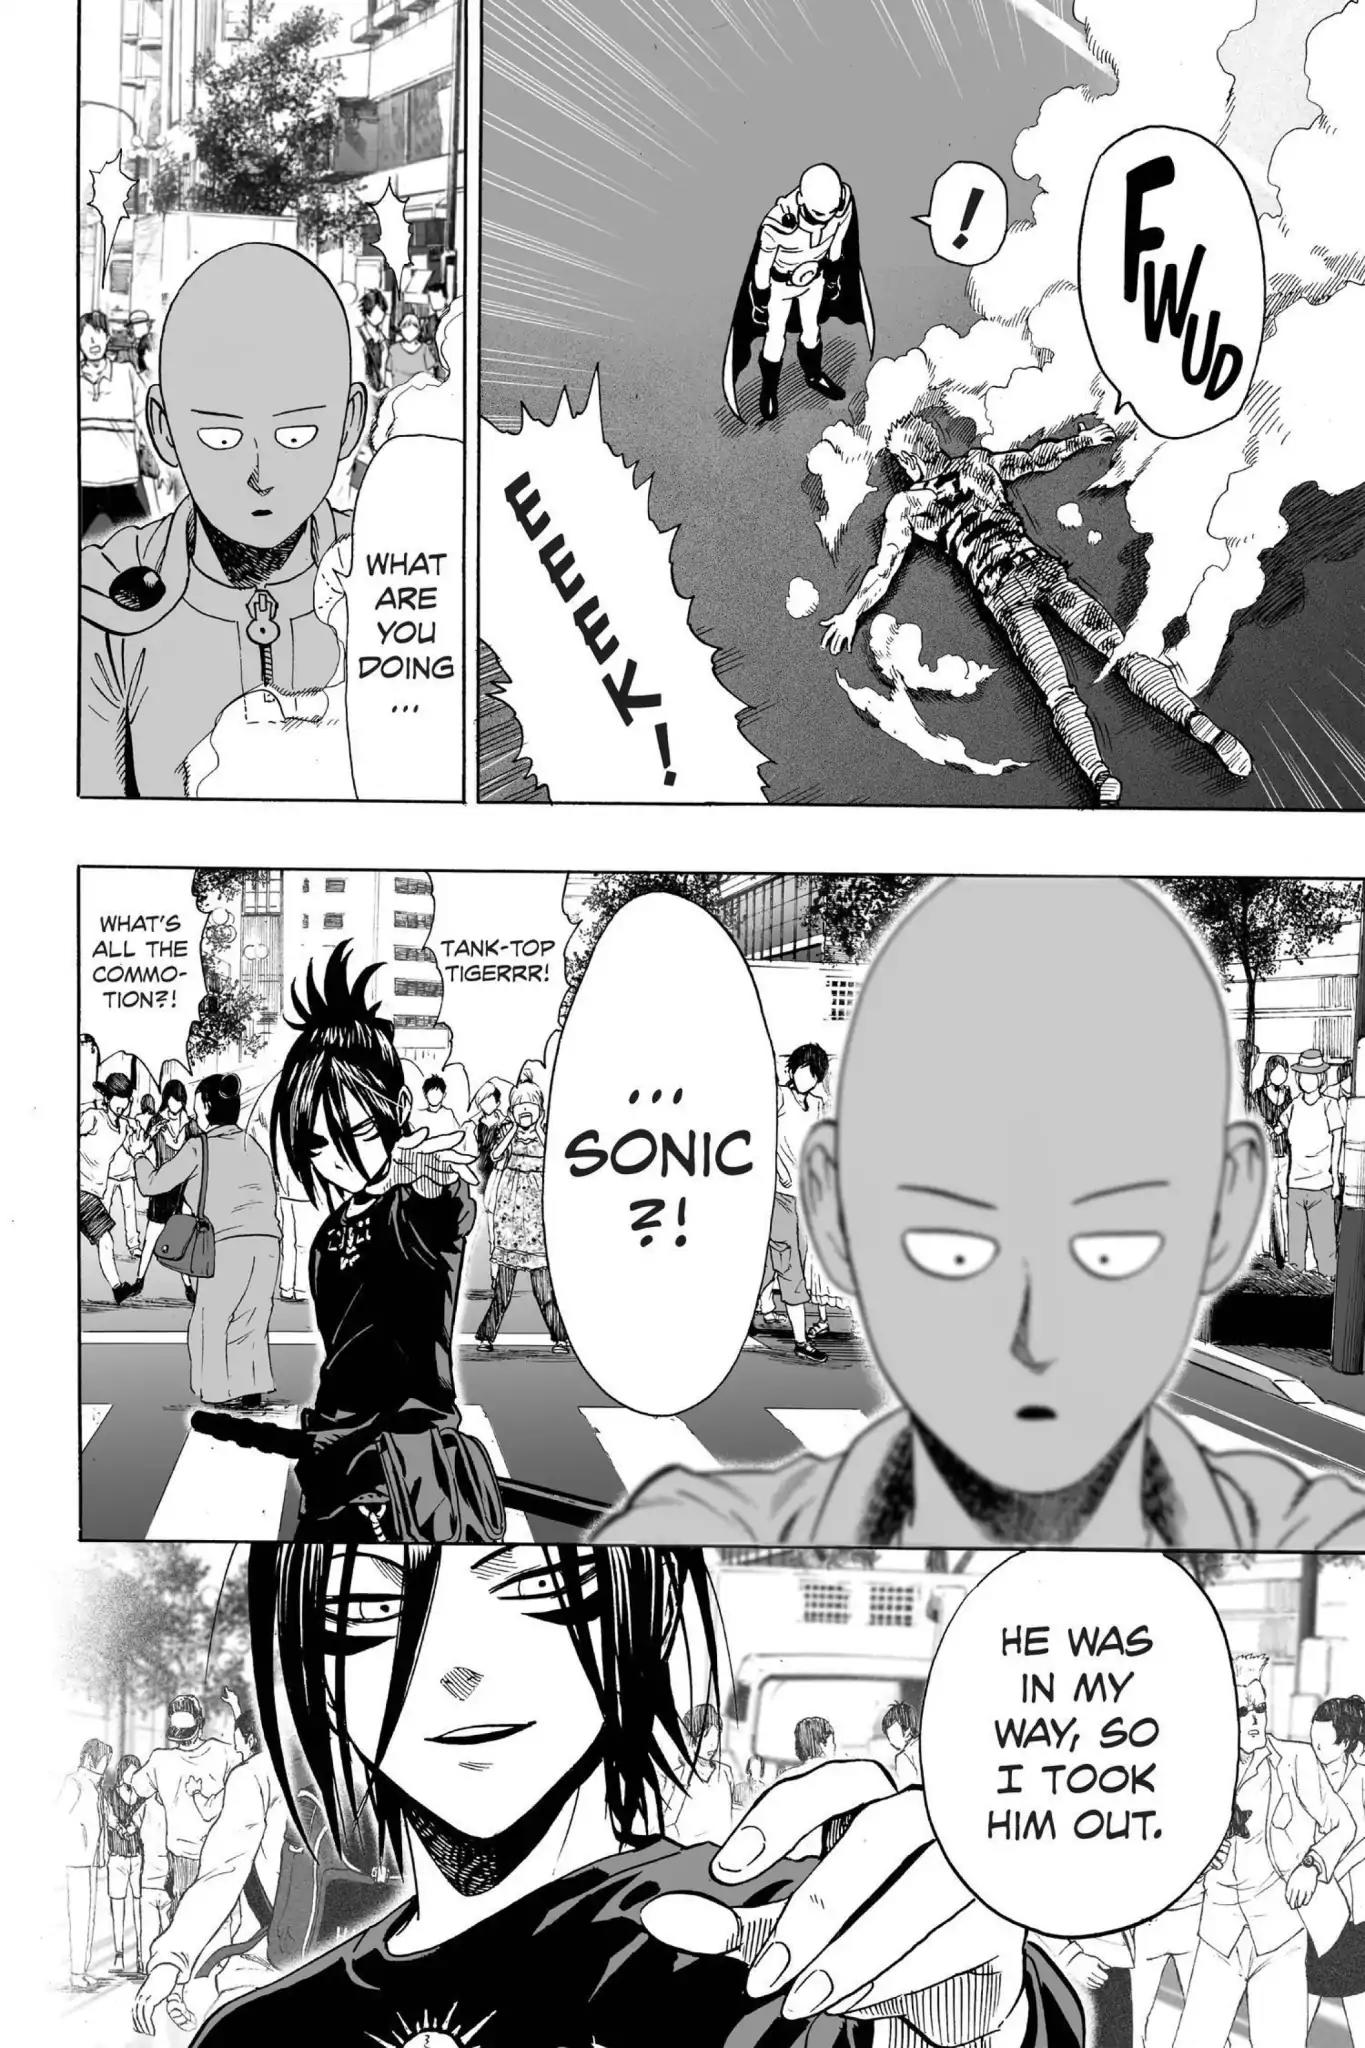 One Punch Man, Chapter 19 No Time For This image 14